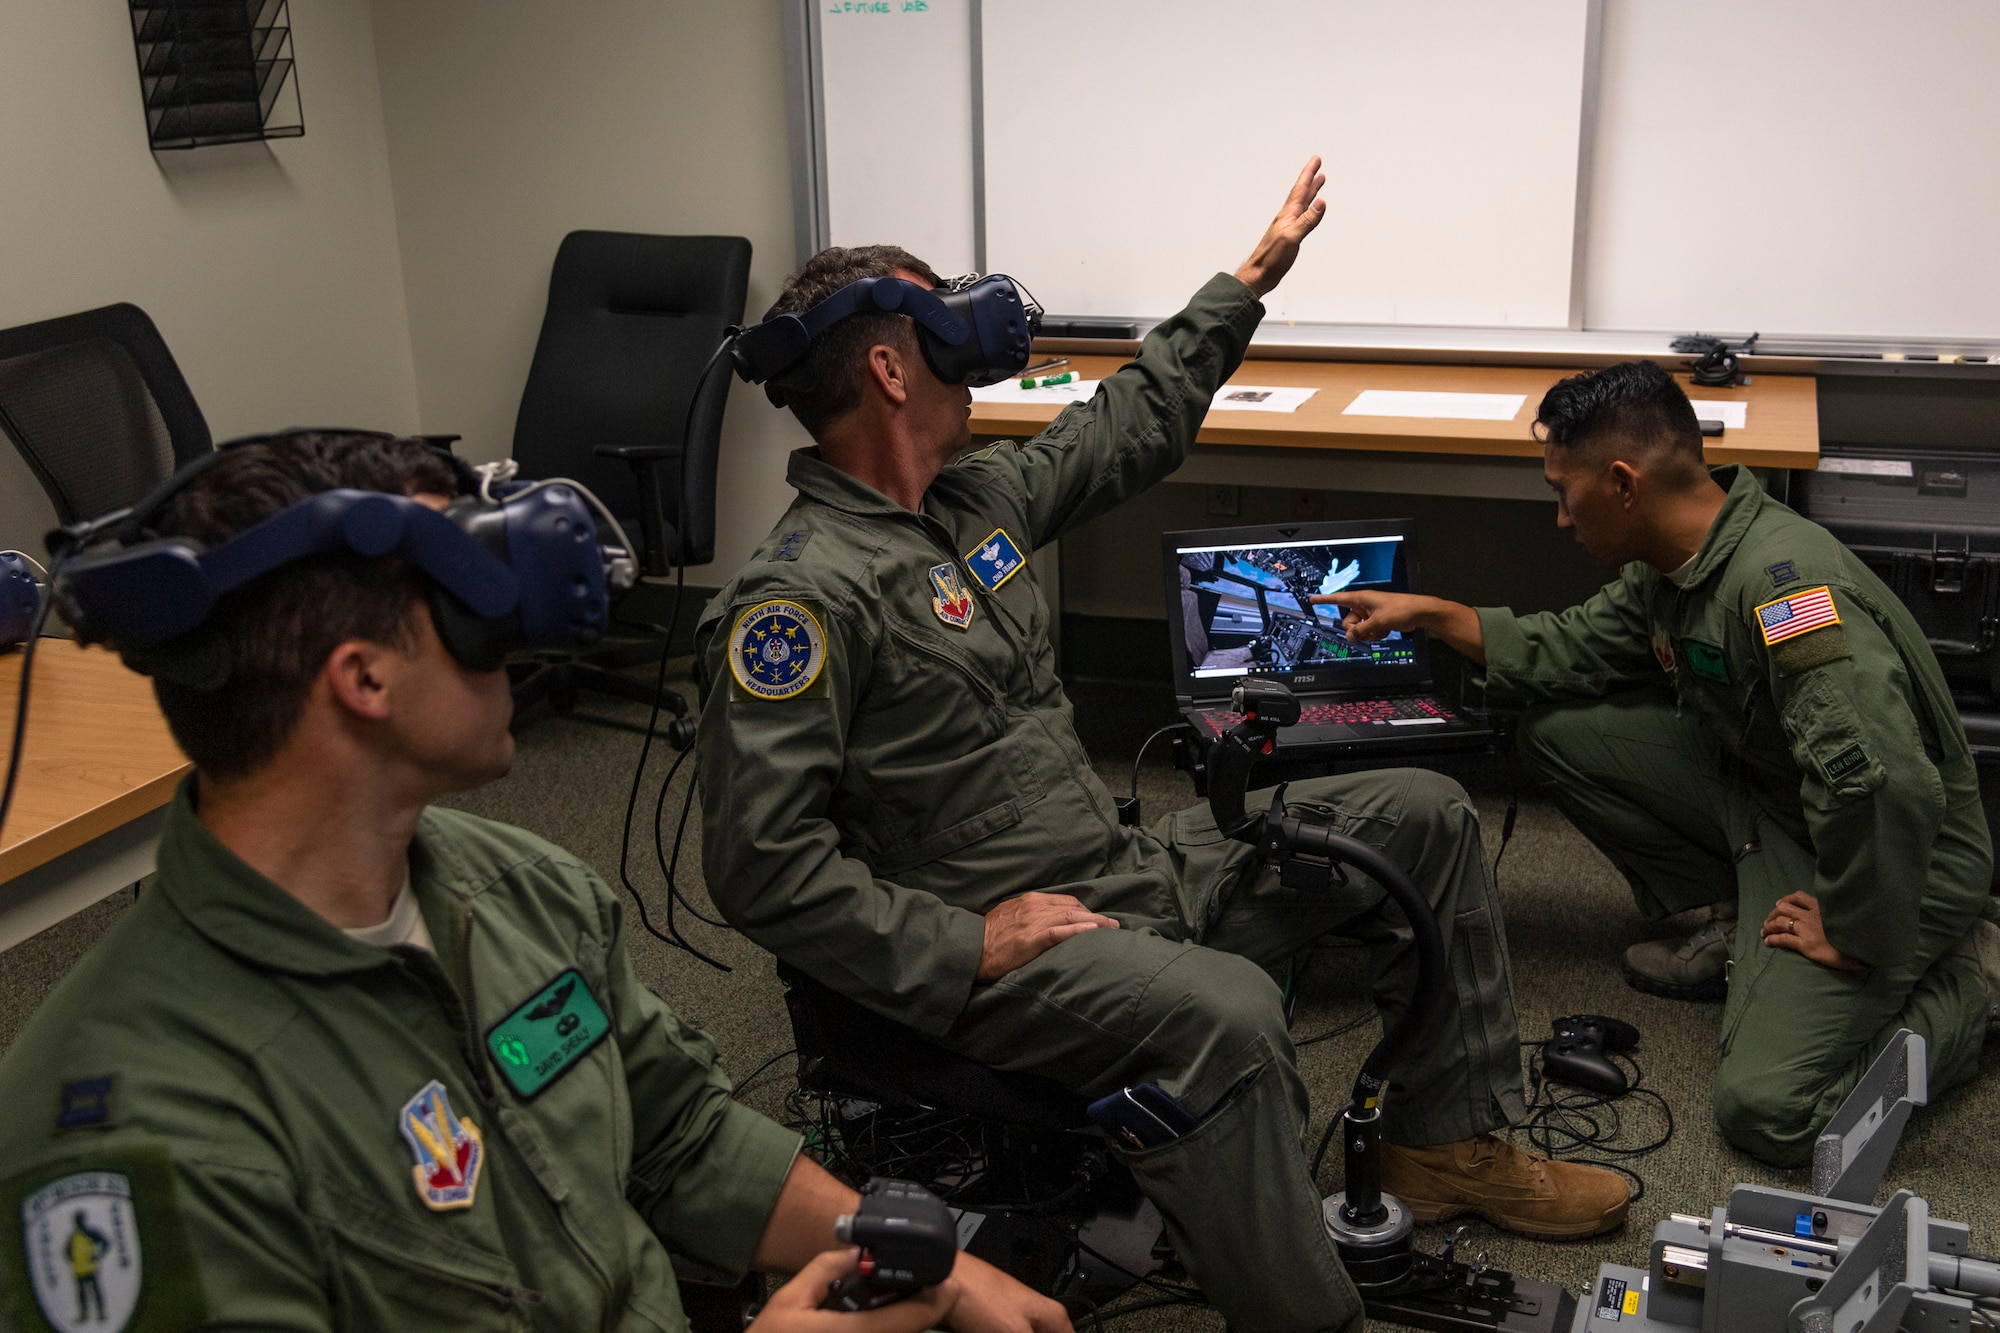 U.S. Air Force Maj. Gen. Chad Franks, center, Ninth Air Force commander, tests the 41st Rescue Squadron’s (RQS) virtual reality flight simulator before a flight at Moody Air Force Base, Ga., Aug. 8, 2019. It was Franks’ initial flight in the Ninth Air Force commander’s flagship aircraft, an HH-60G Pave Hawk assigned to the 41st RQS. Franks, who on separate occasions served as the commander for the 23d Wing and 347th Rescue Group, is a command pilot with more than 3,300 hours in multiple aircraft including HC-130J Combat King II and HH-60G Pave Hawk. (U.S. Air Force photo by Airman 1st Class Taryn Butler)